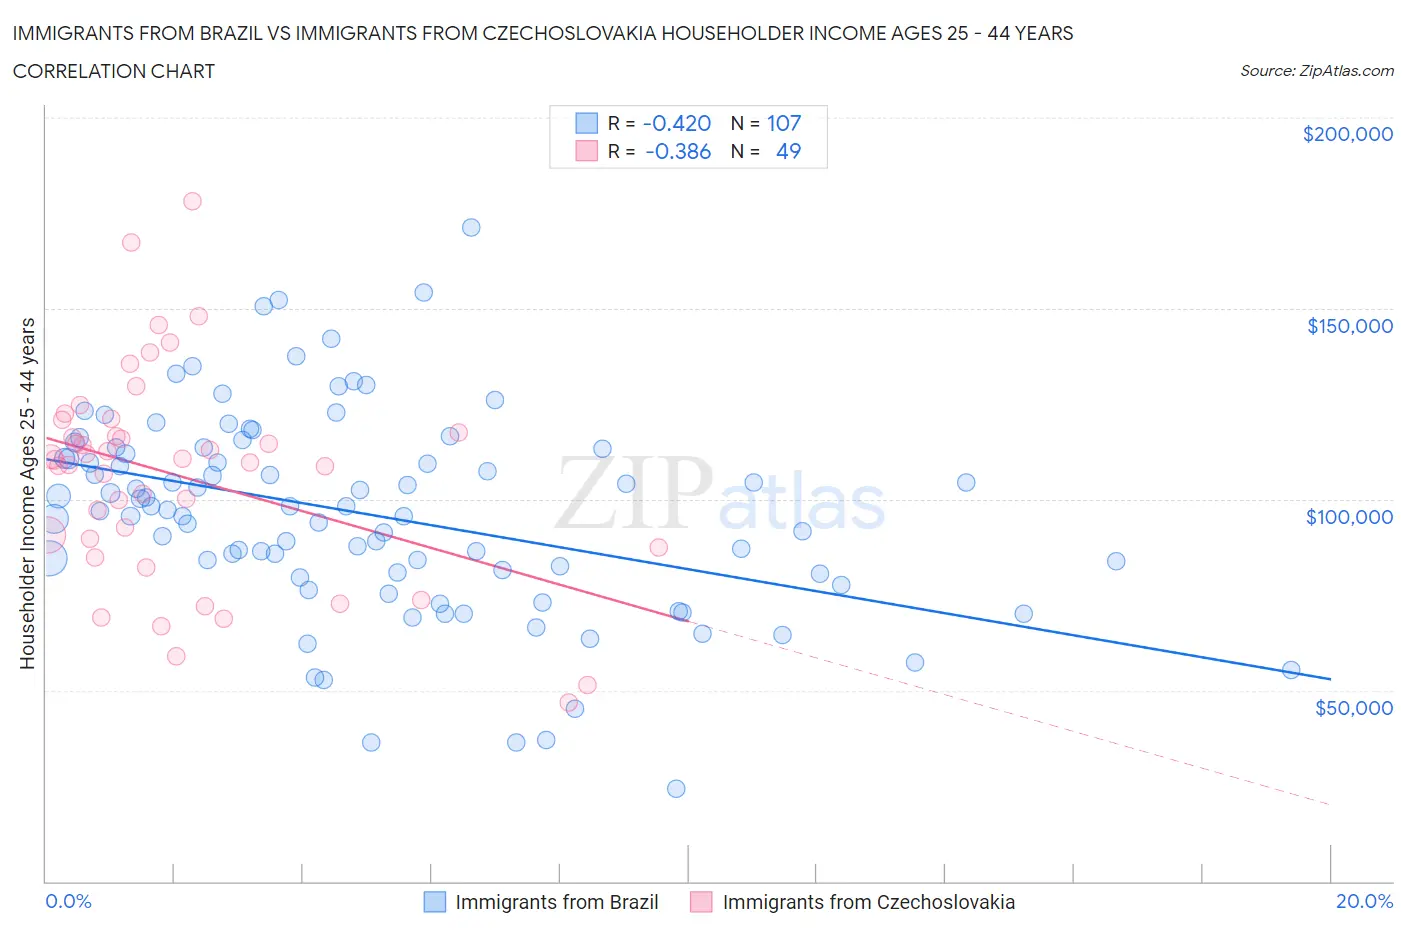 Immigrants from Brazil vs Immigrants from Czechoslovakia Householder Income Ages 25 - 44 years